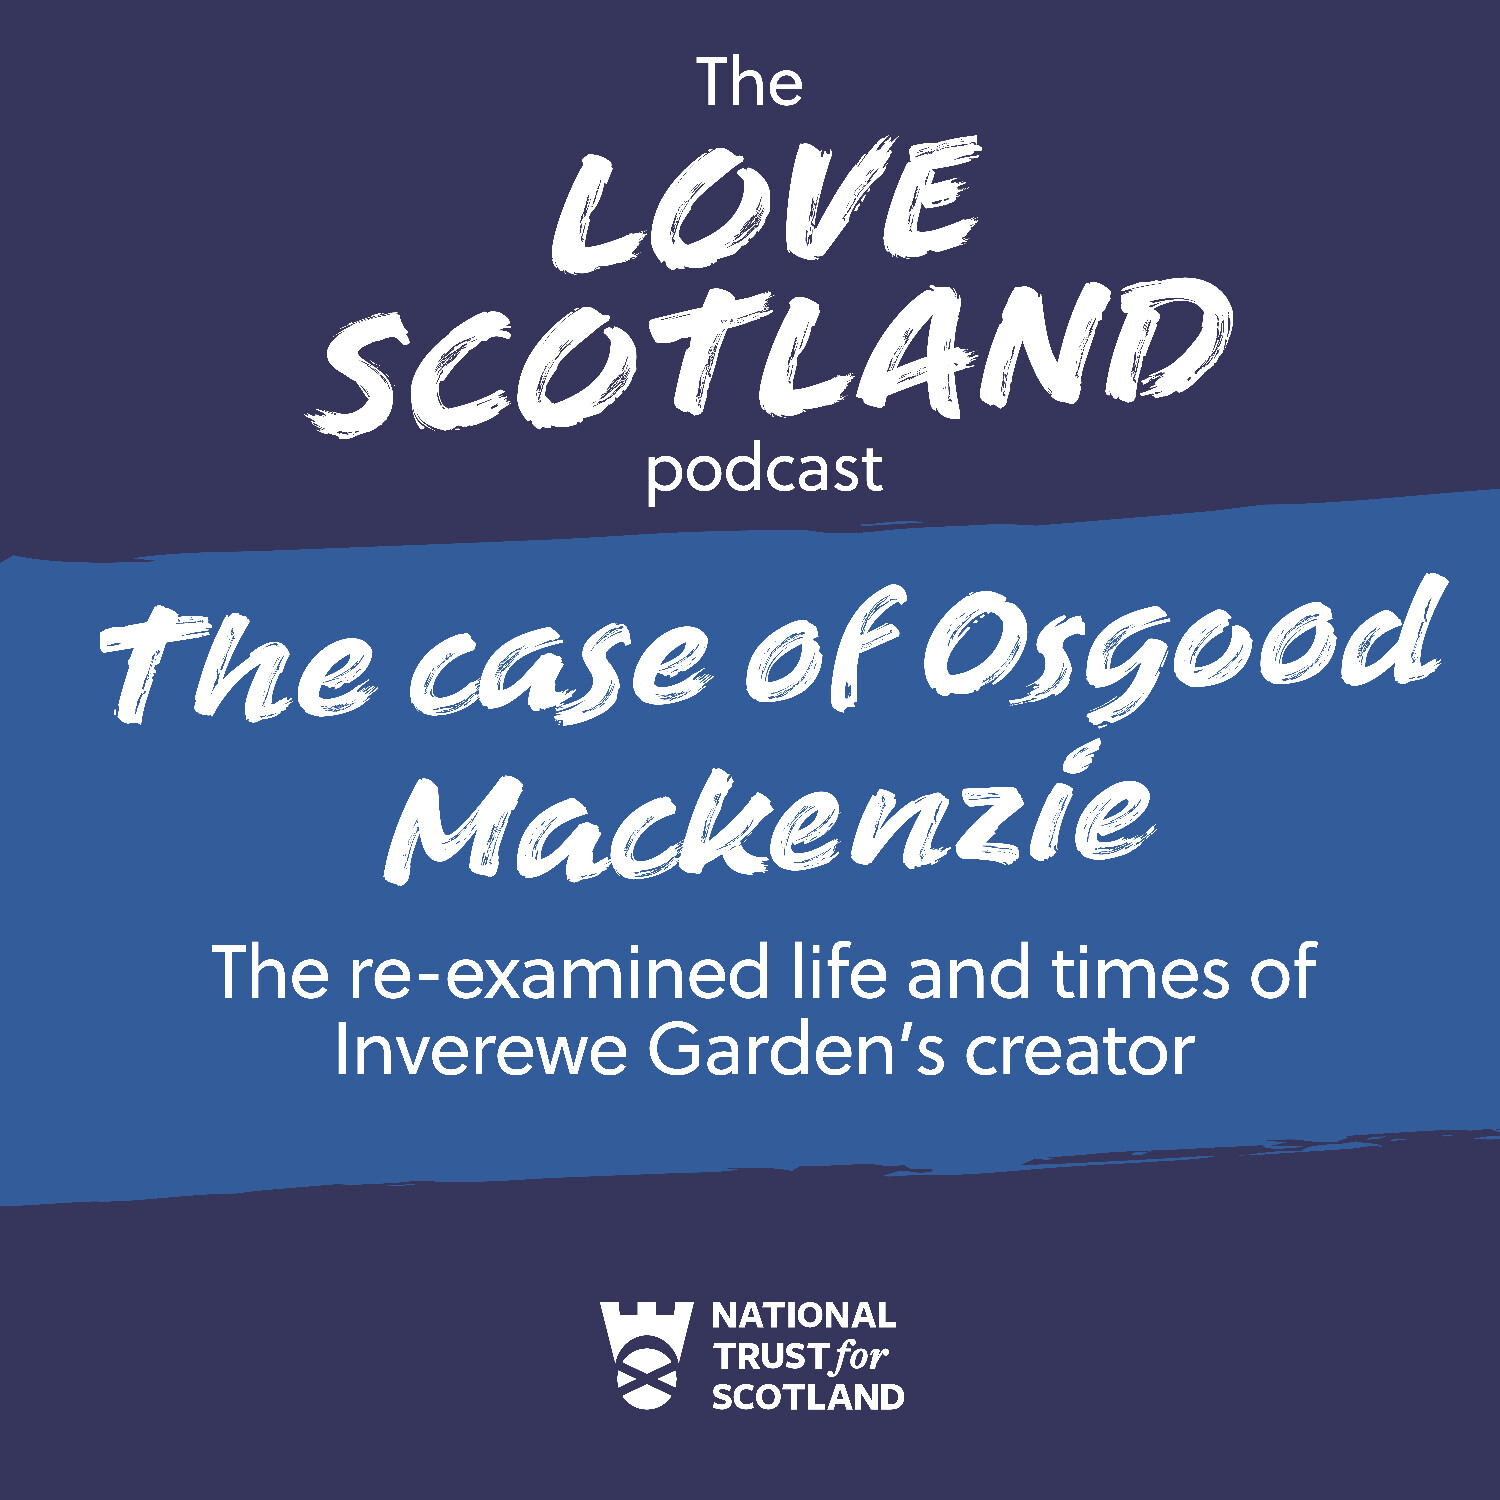 The colourful case of Osgood Mackenzie, plant pioneer and creator of Inverewe garden